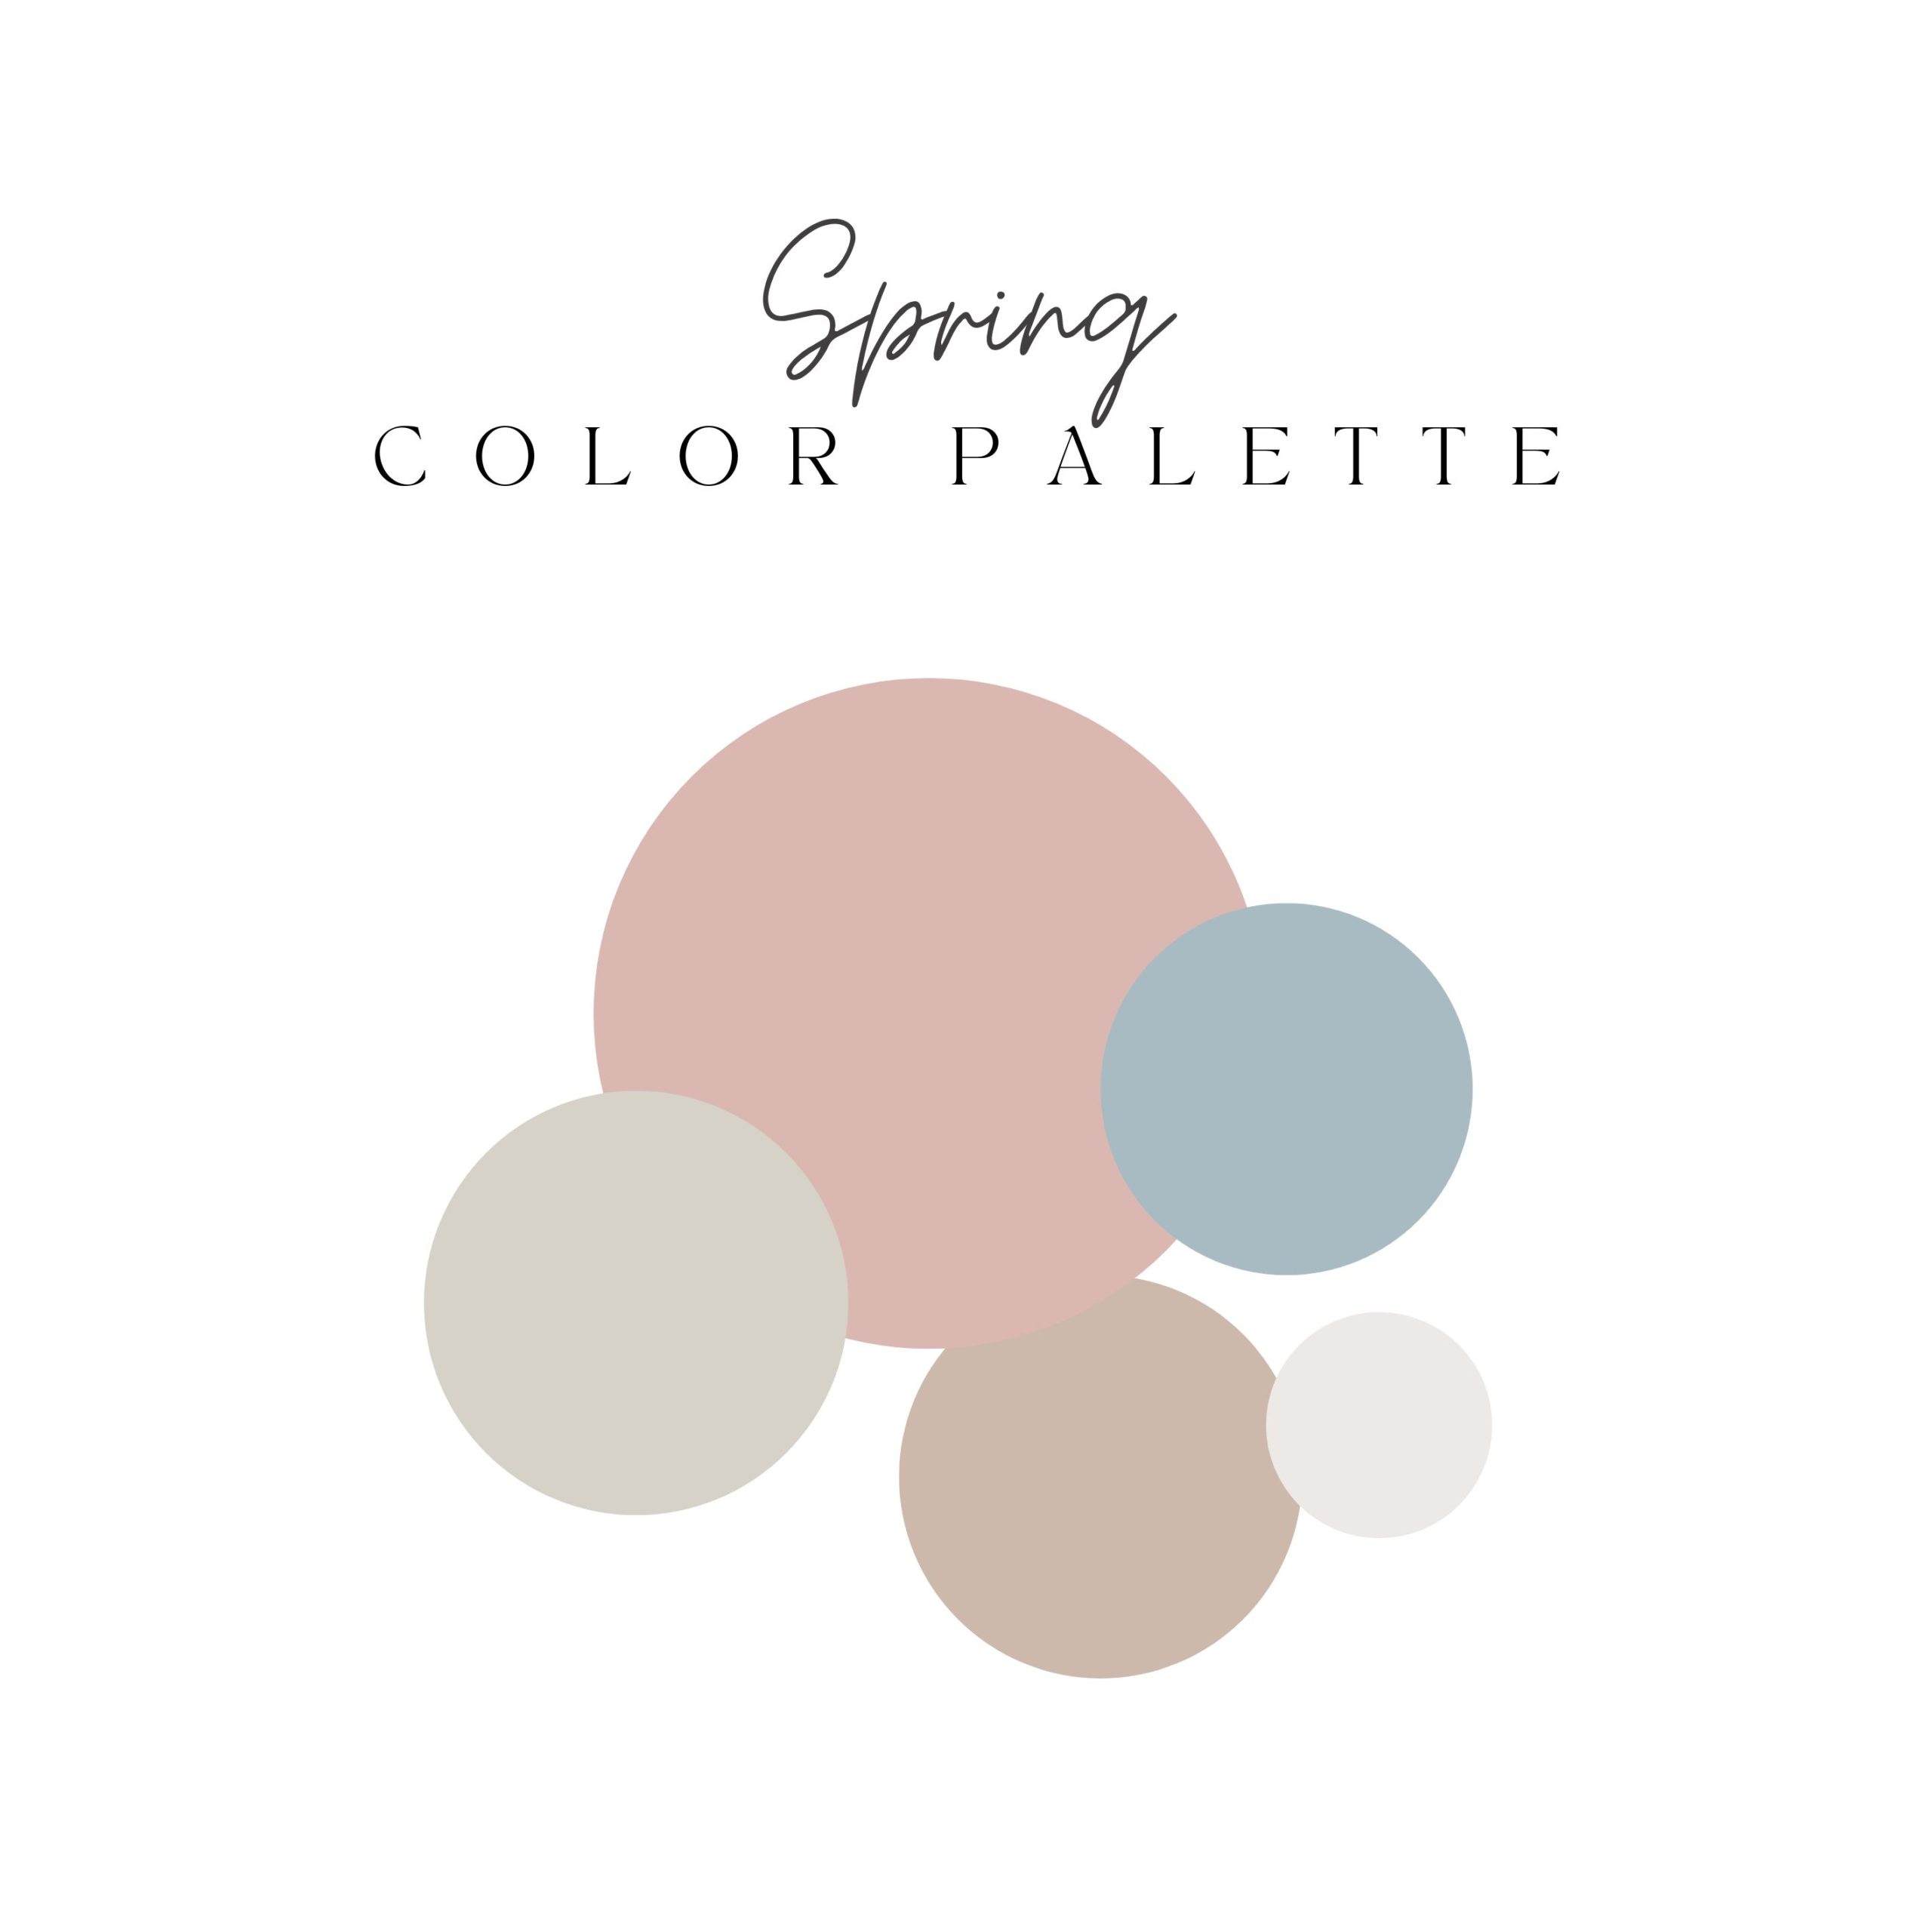 spring color palette for family photo outfits with pastel pink, robin egg blue, and neutrals